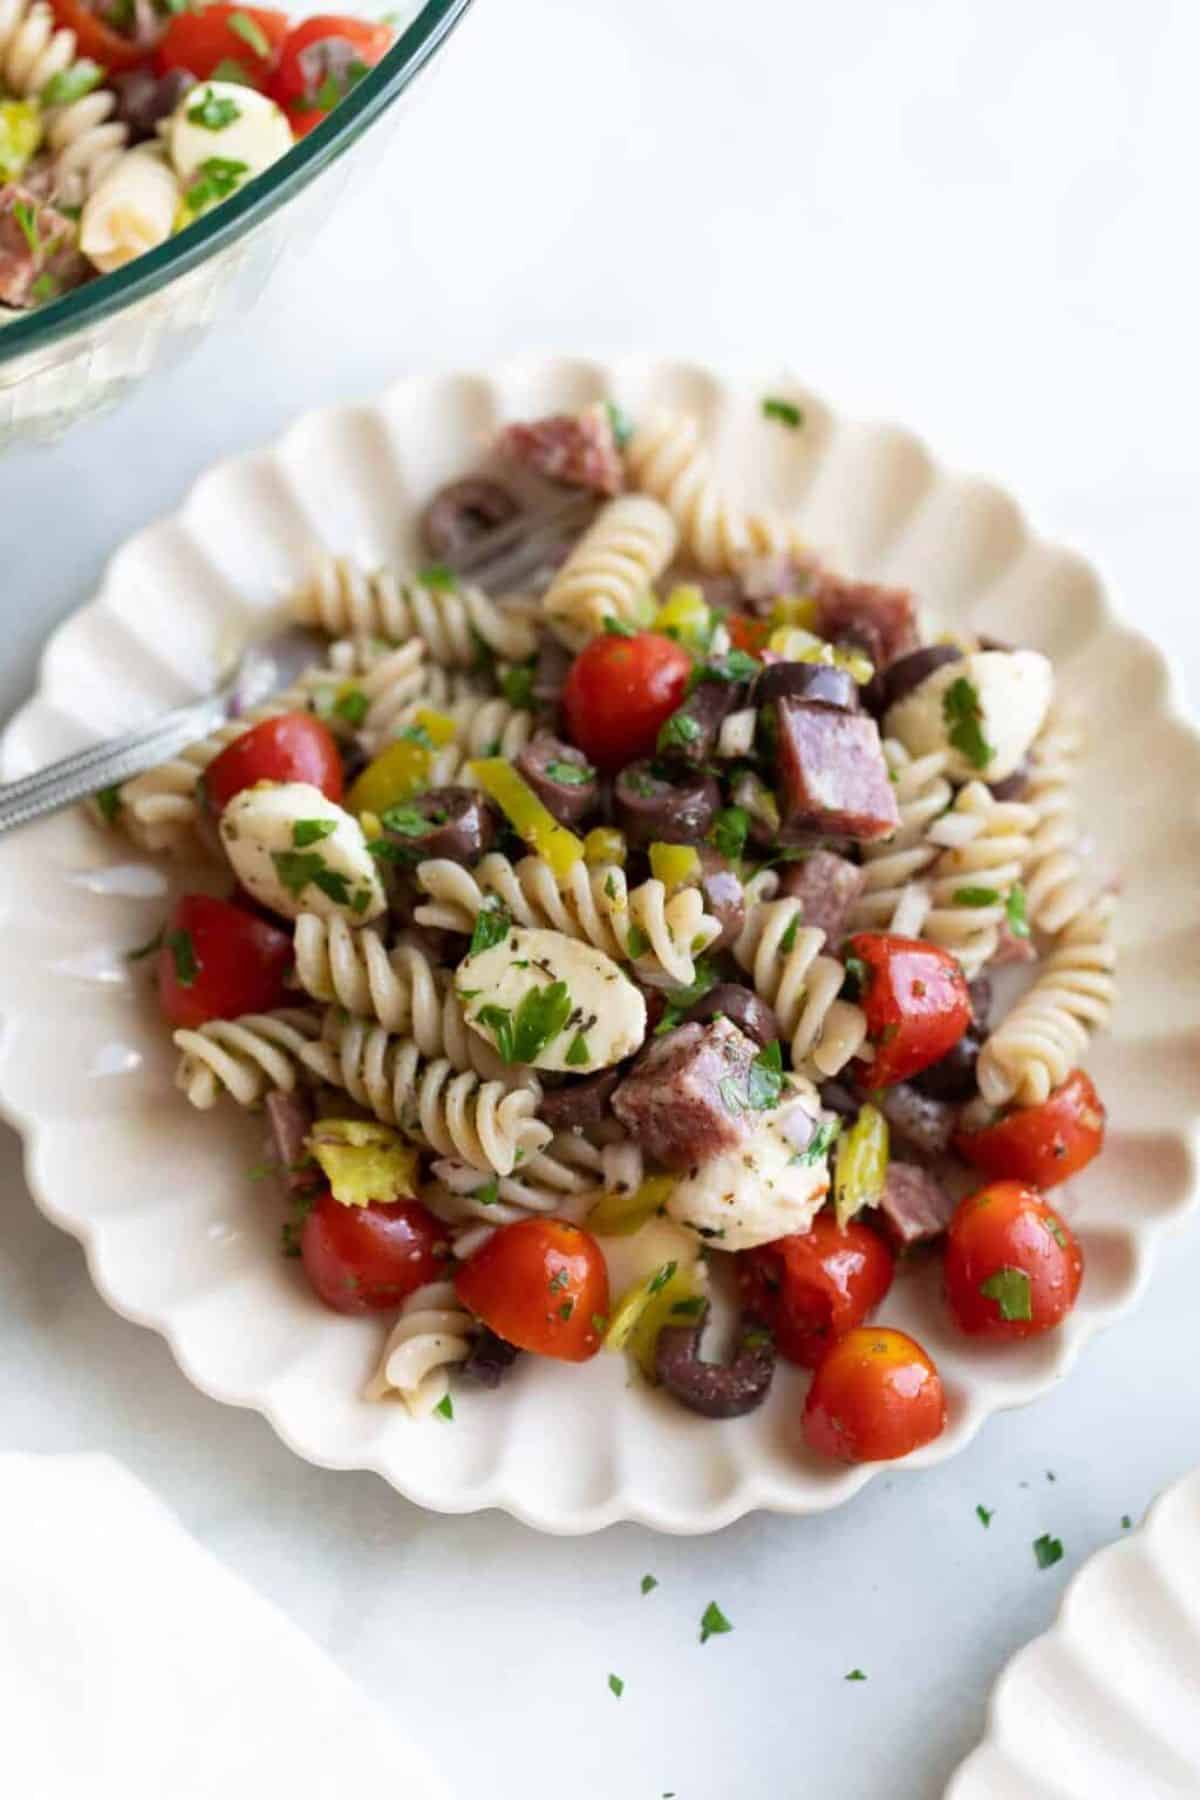 Healthy Gluten-Free Italian Pasta Salad on a white plate with a fork.